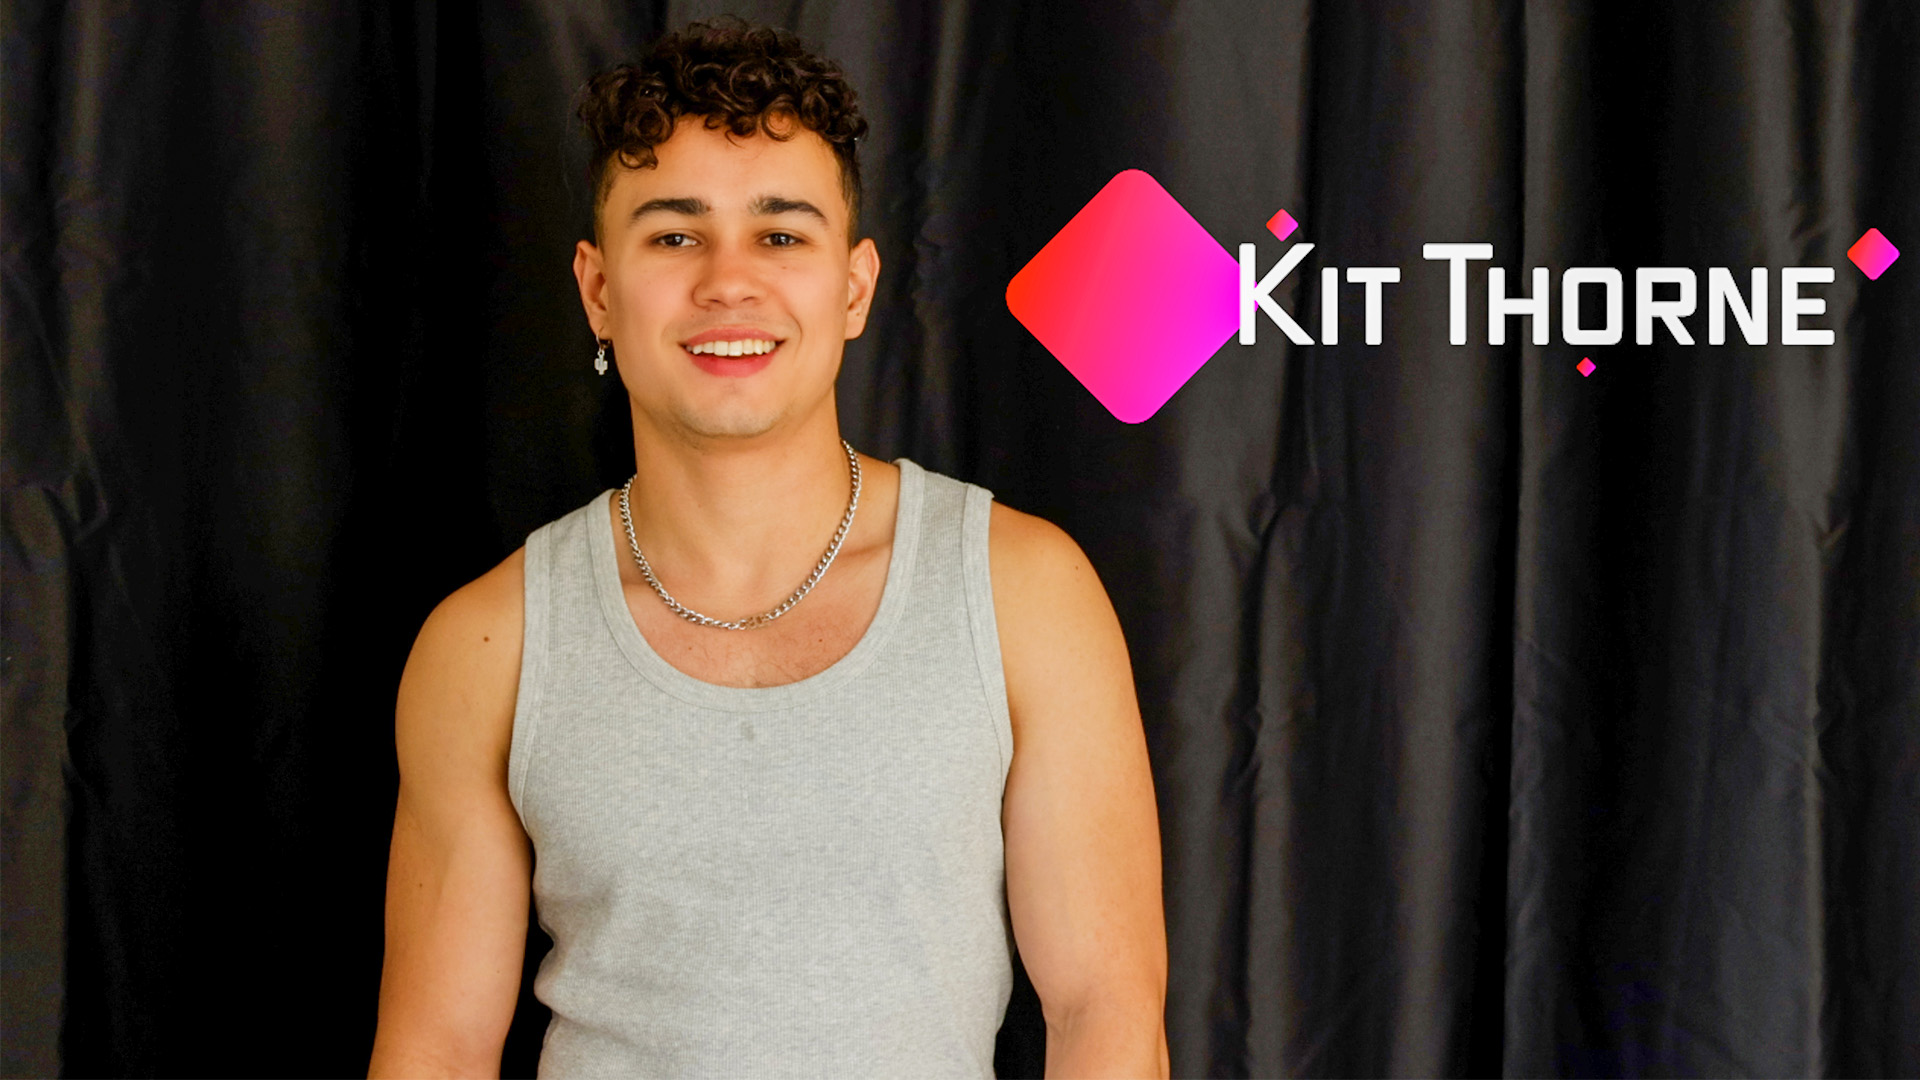 Interview: Kit Thorne Is On Set For Some Questions!